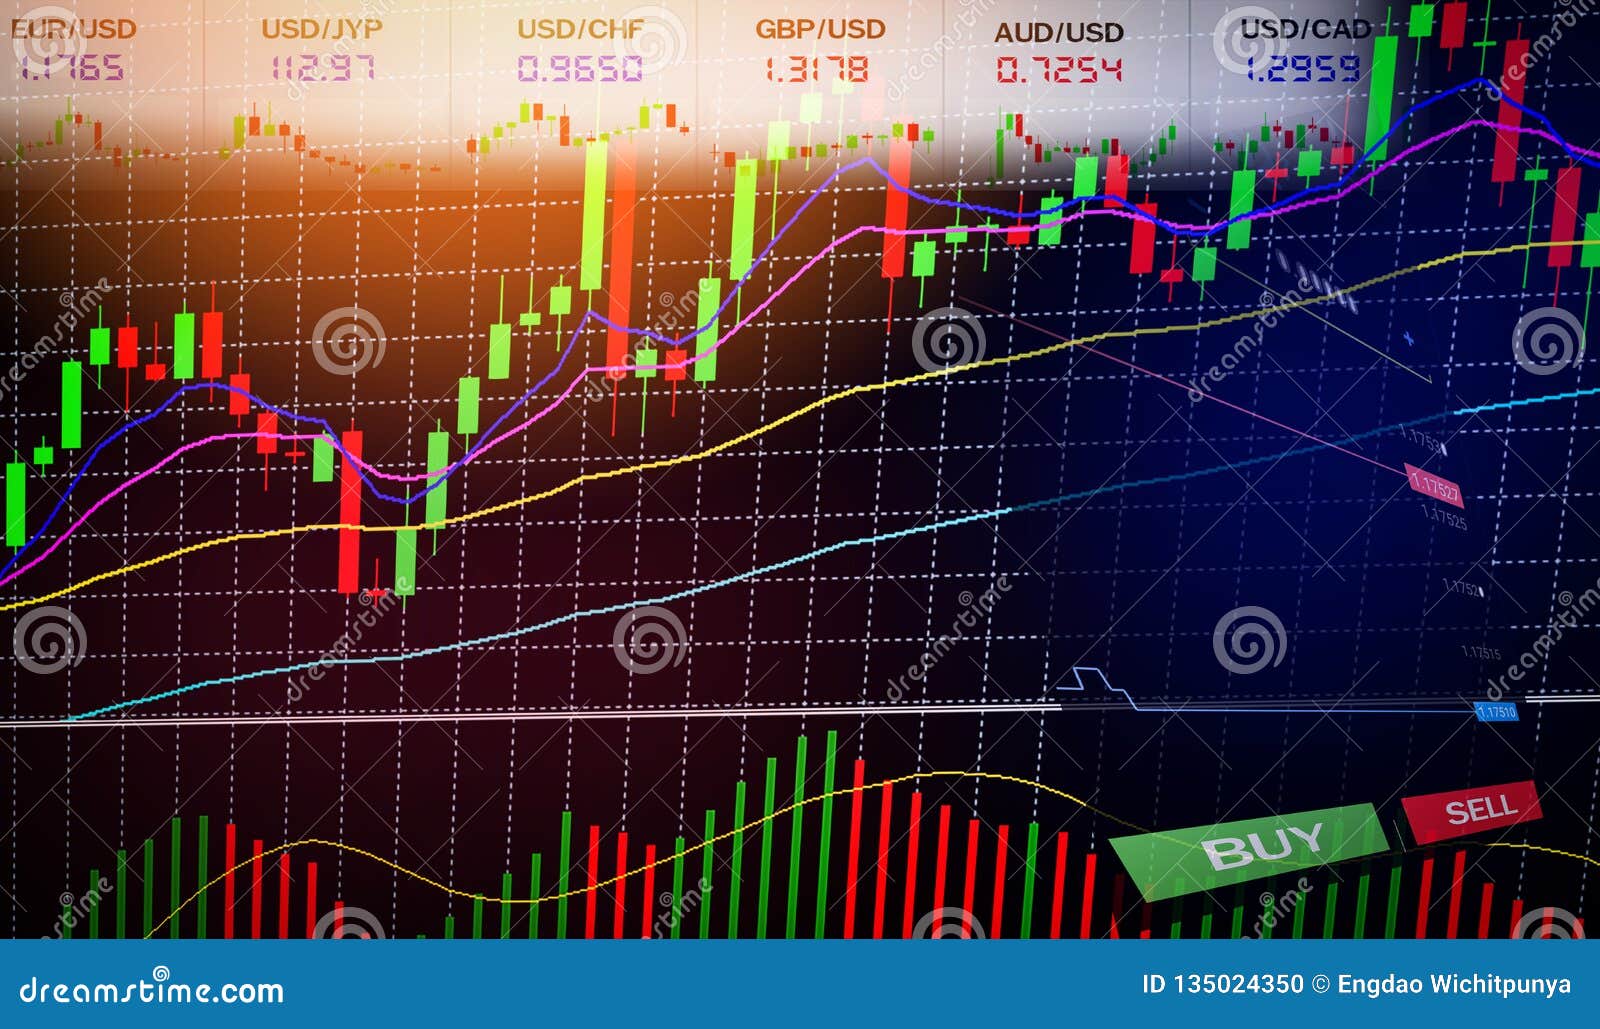 financial analysis of the forex market